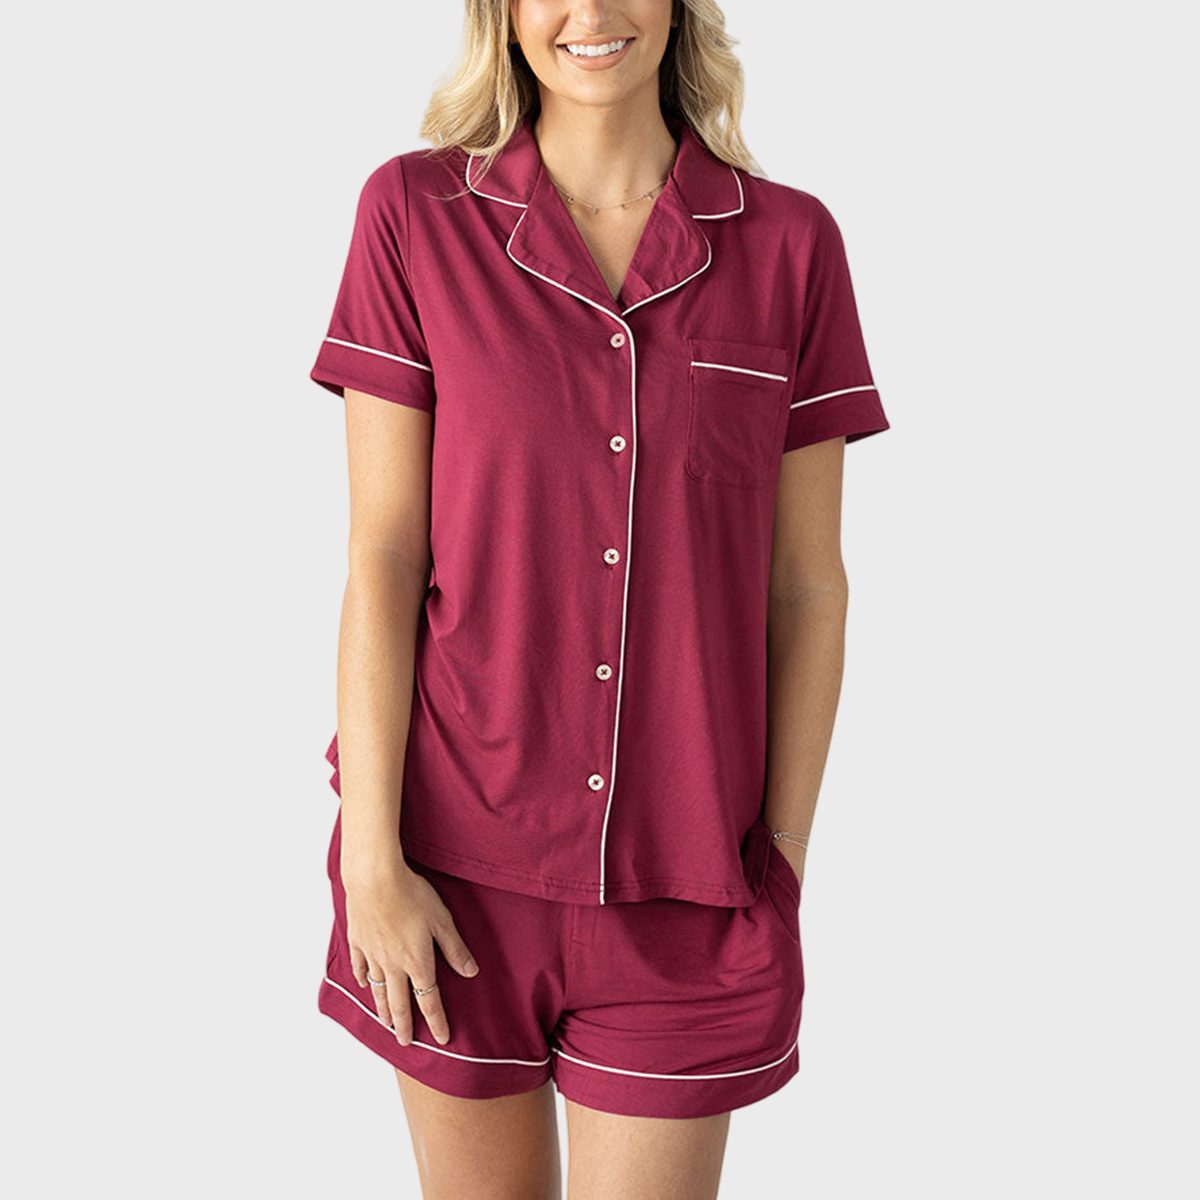 Clea Bamboo Classic Long Sleeve Pajama Set, Kindred Bravely